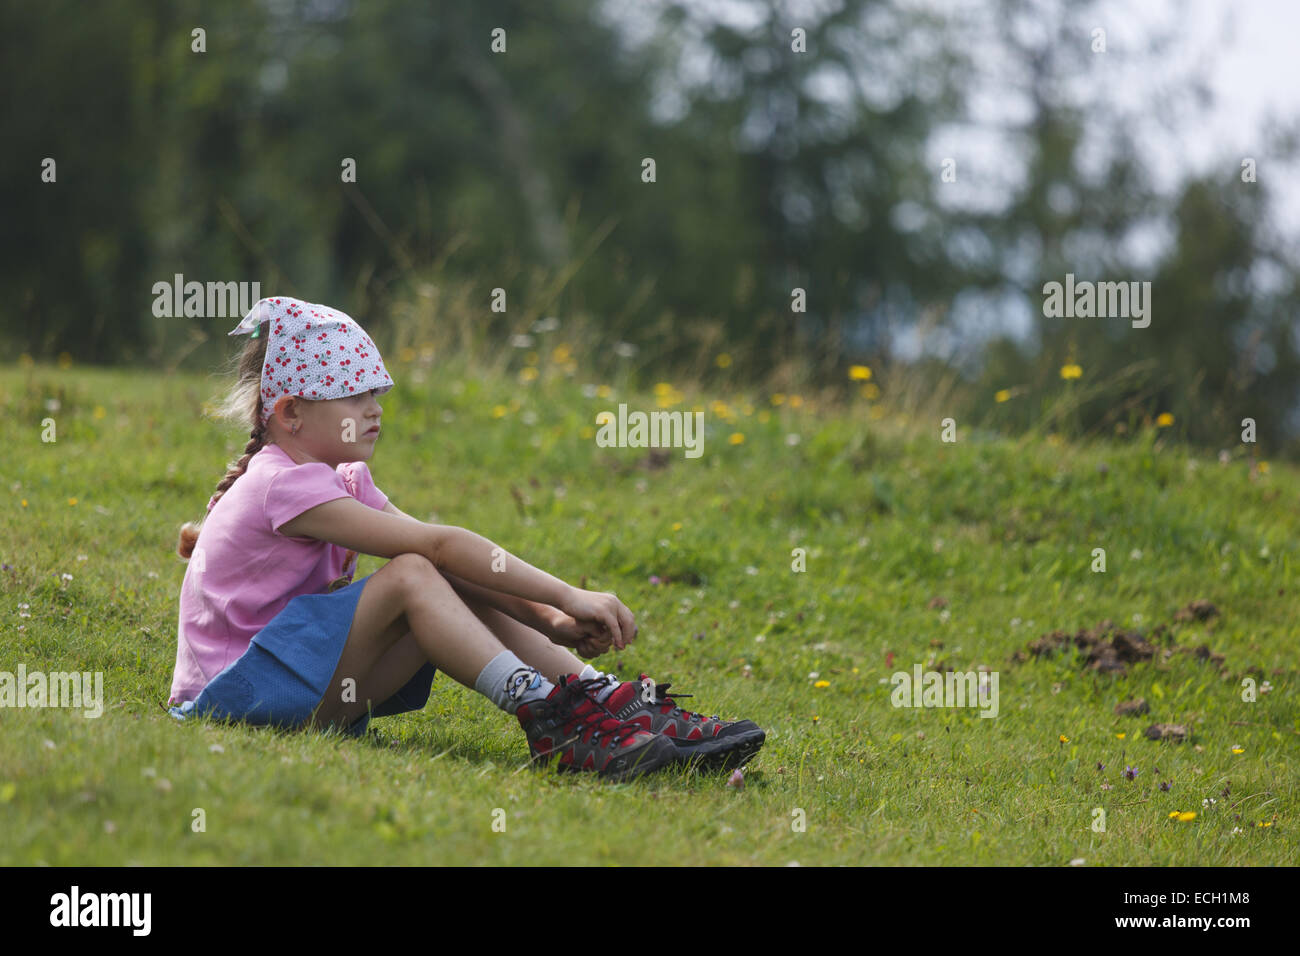 Girl sitting in grass Banque D'Images